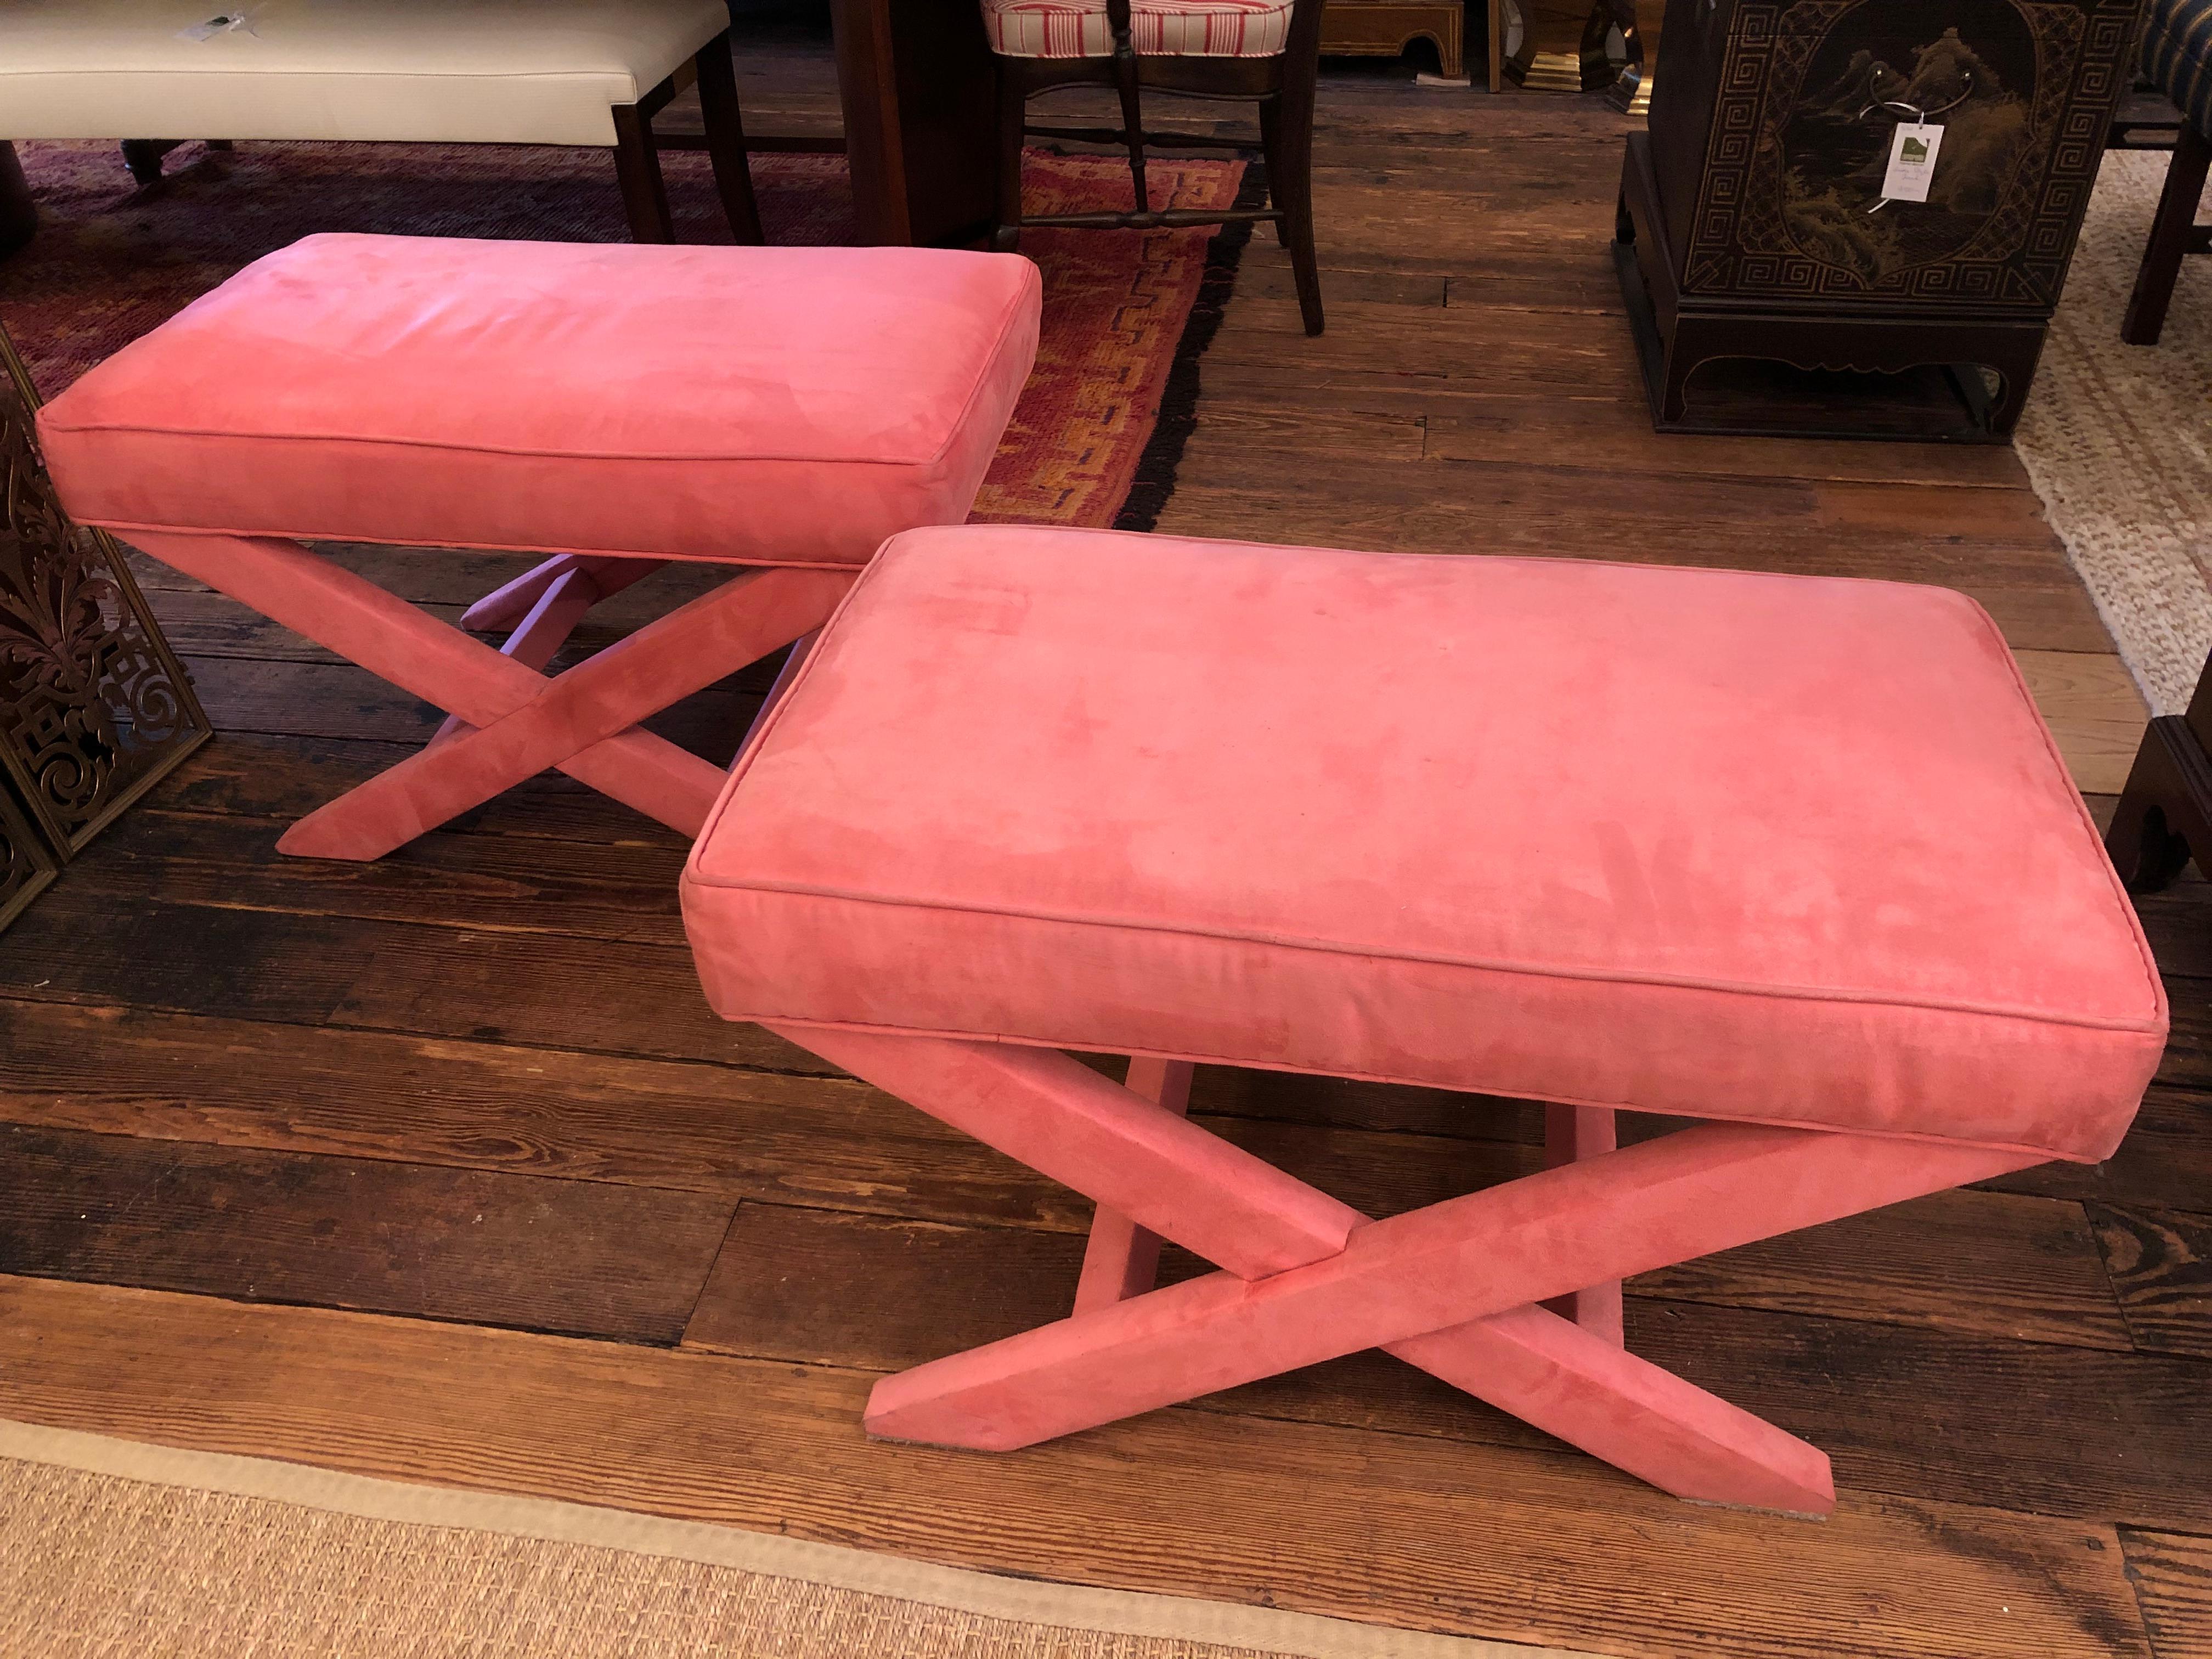 From the estate of NYC socialite Georgette Mosbacher a fetching pair of hot pink ultrasuede benches having mid century modern X base stretchers and rectangular shape. The essence of glamour.